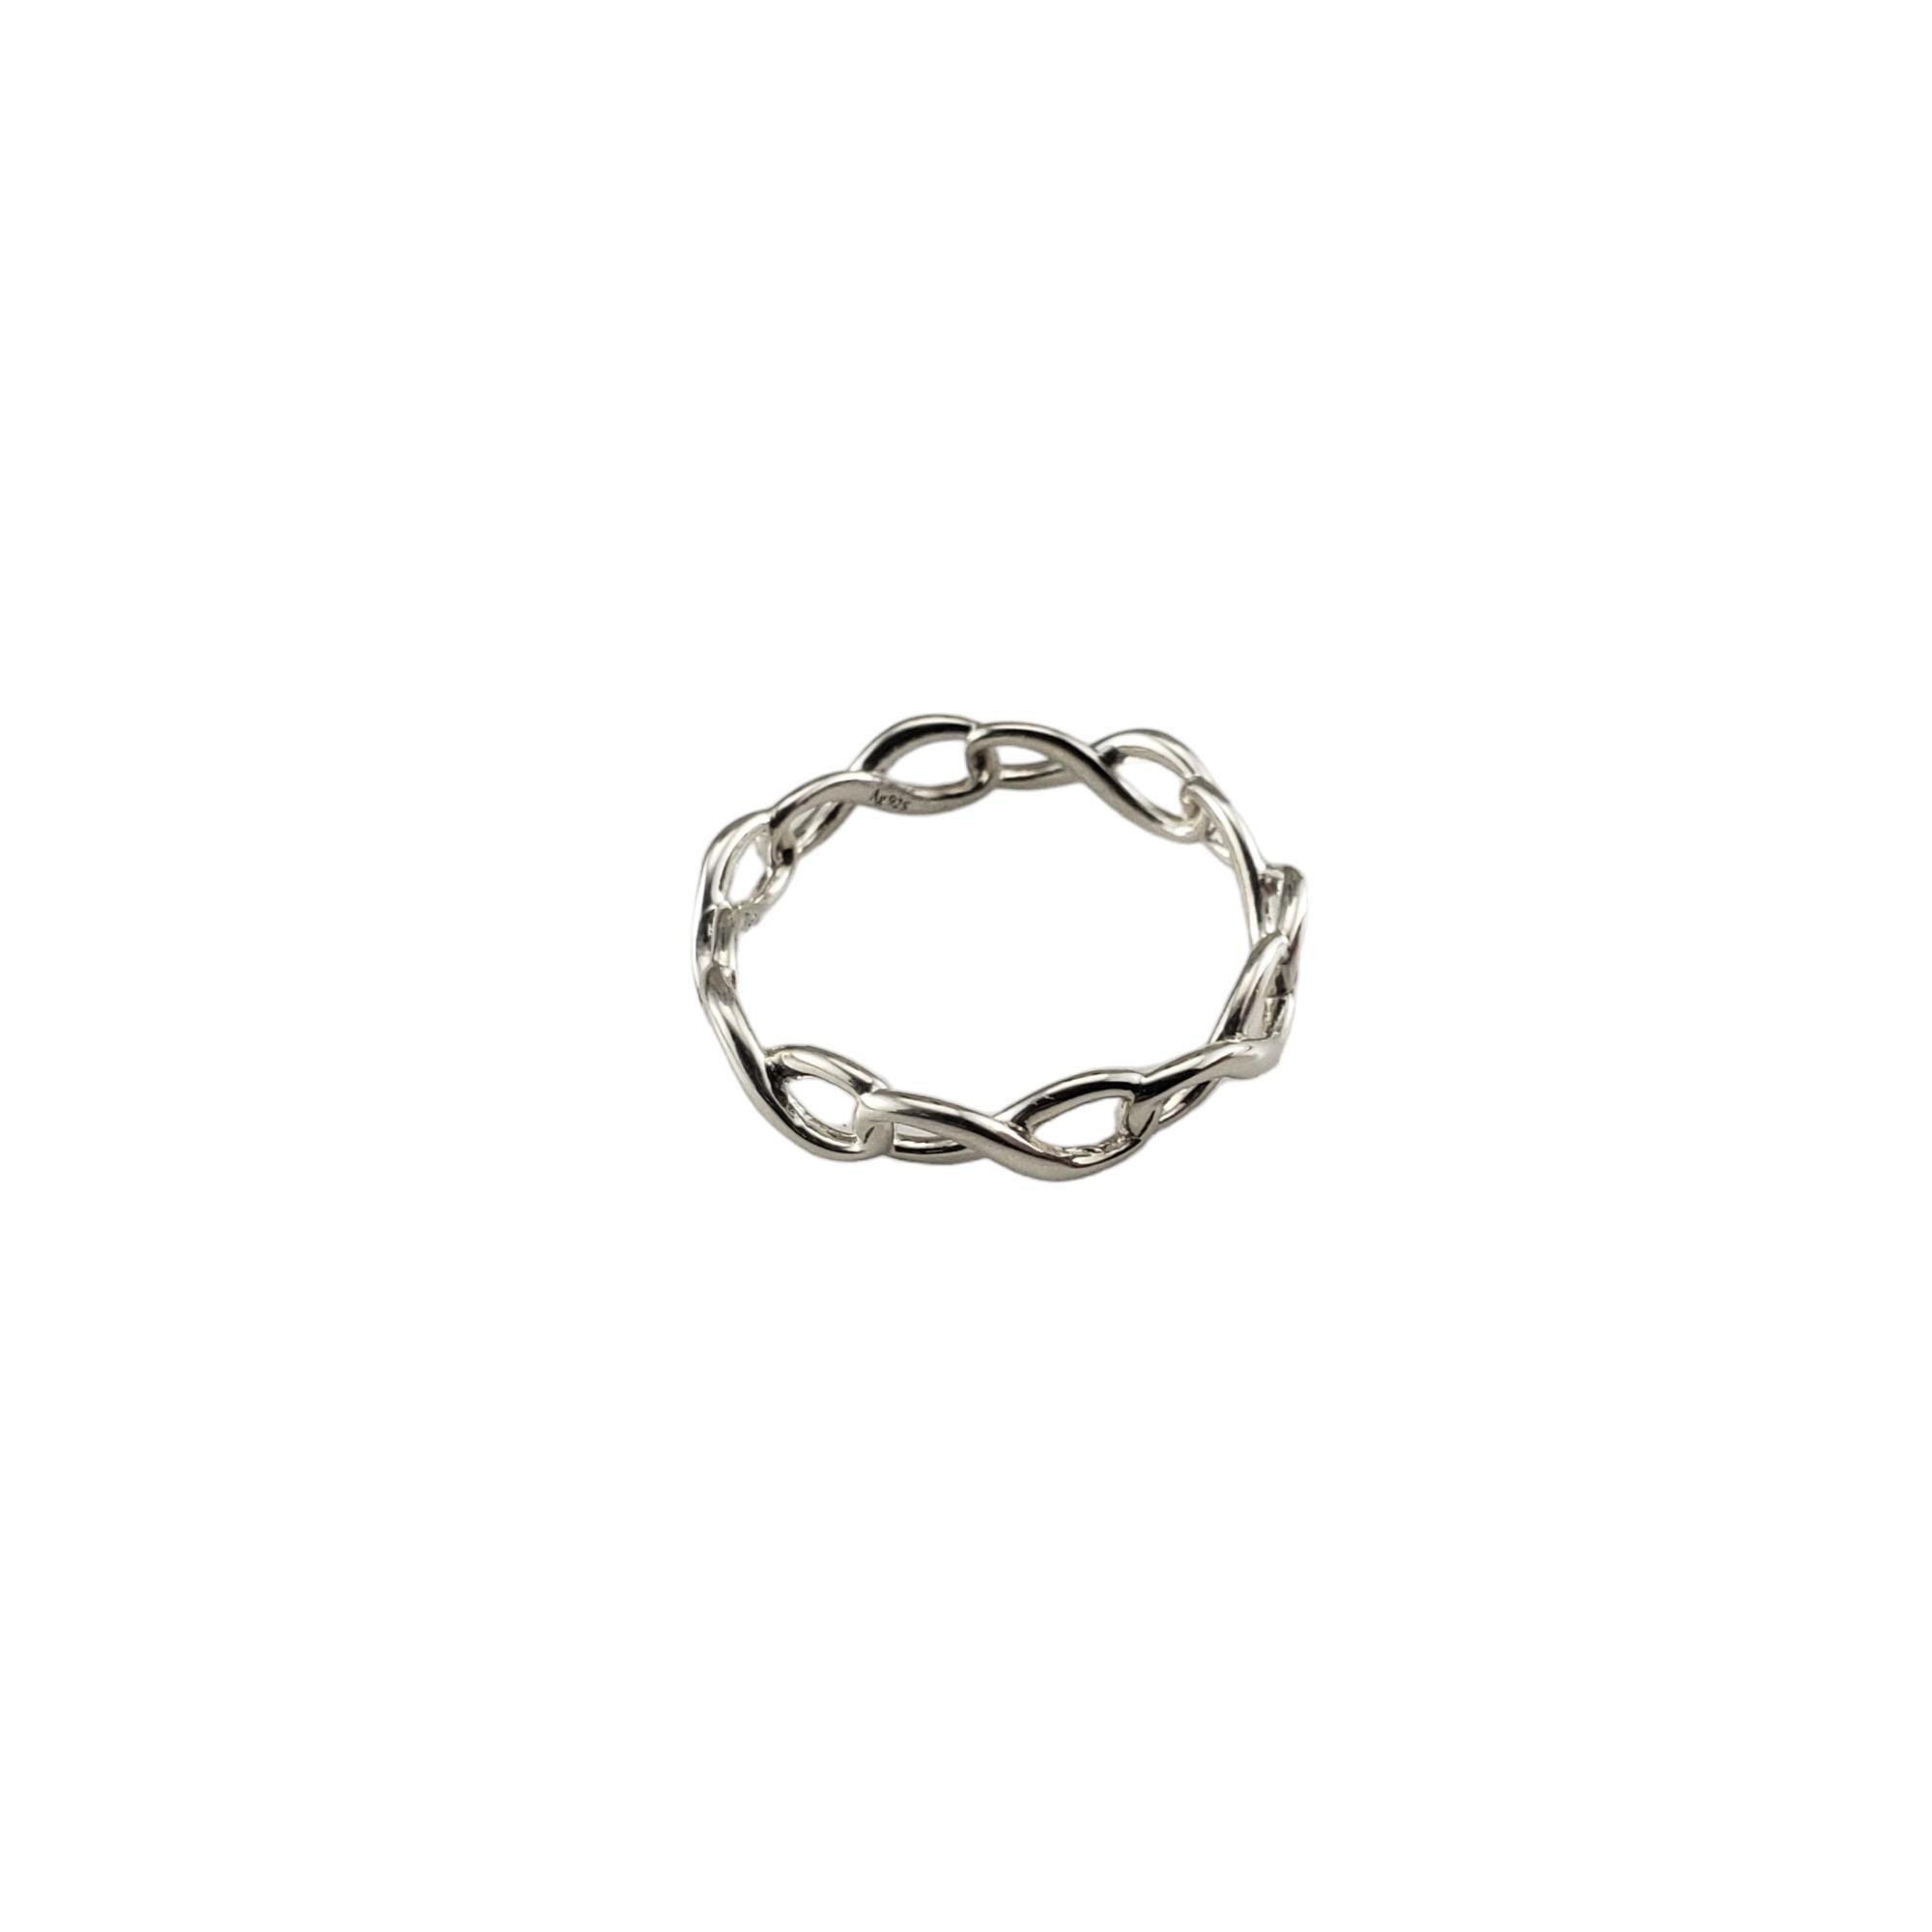 Tiffany & Co. Sterling Silver Infinity Band Ring Size 8-8.25 #16244 2